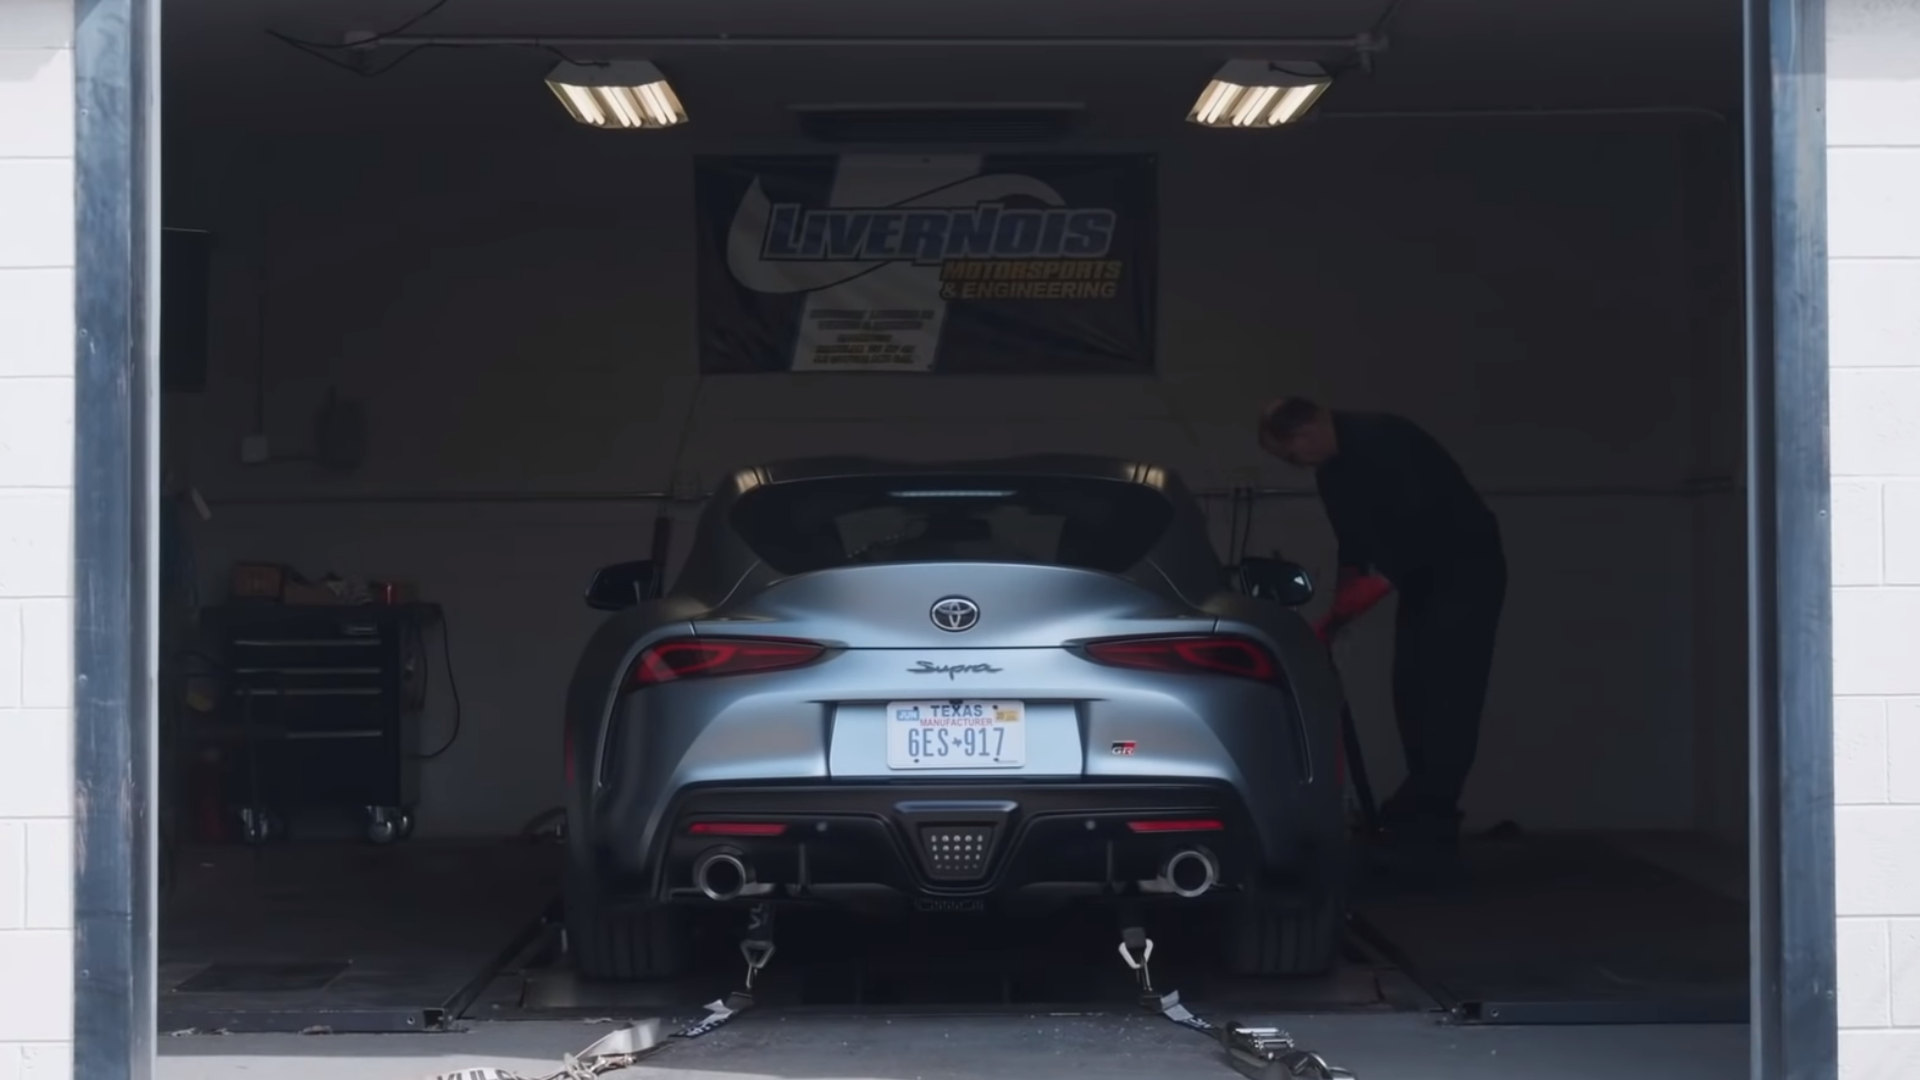 Dyno Test Reveals The 2021 Toyota Supra Has More Power Than Expected